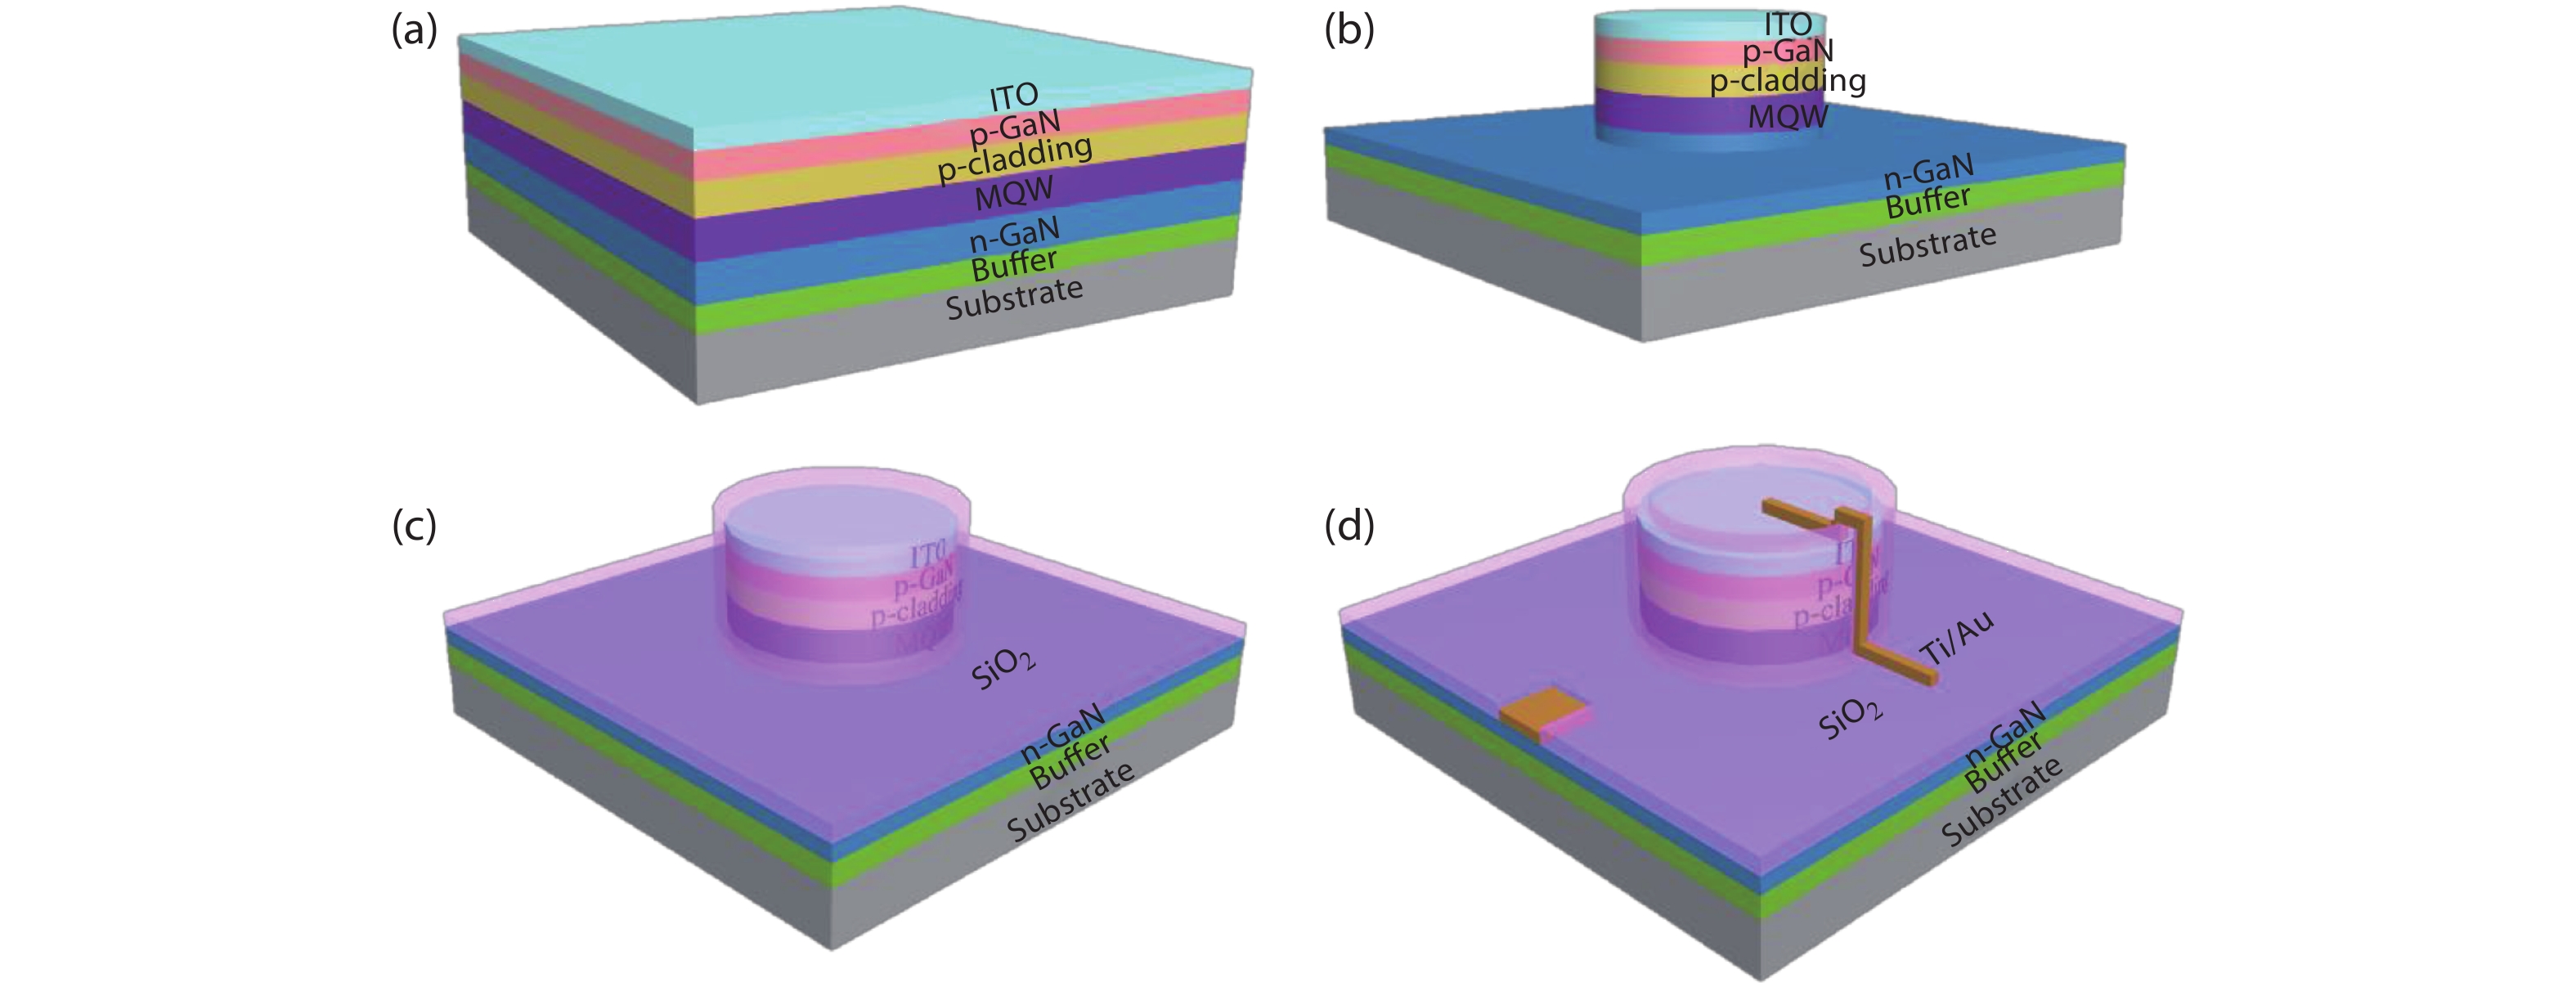 (Color online) (a) The GaN-based epitaxial structure with silicon substrate. (b) Etching to n-GaN layer to form a micro-LED mesa array. (c) The deposition of SiO2 through PECVD. (d) The deposition of Ti/Au to serve as electrodes.